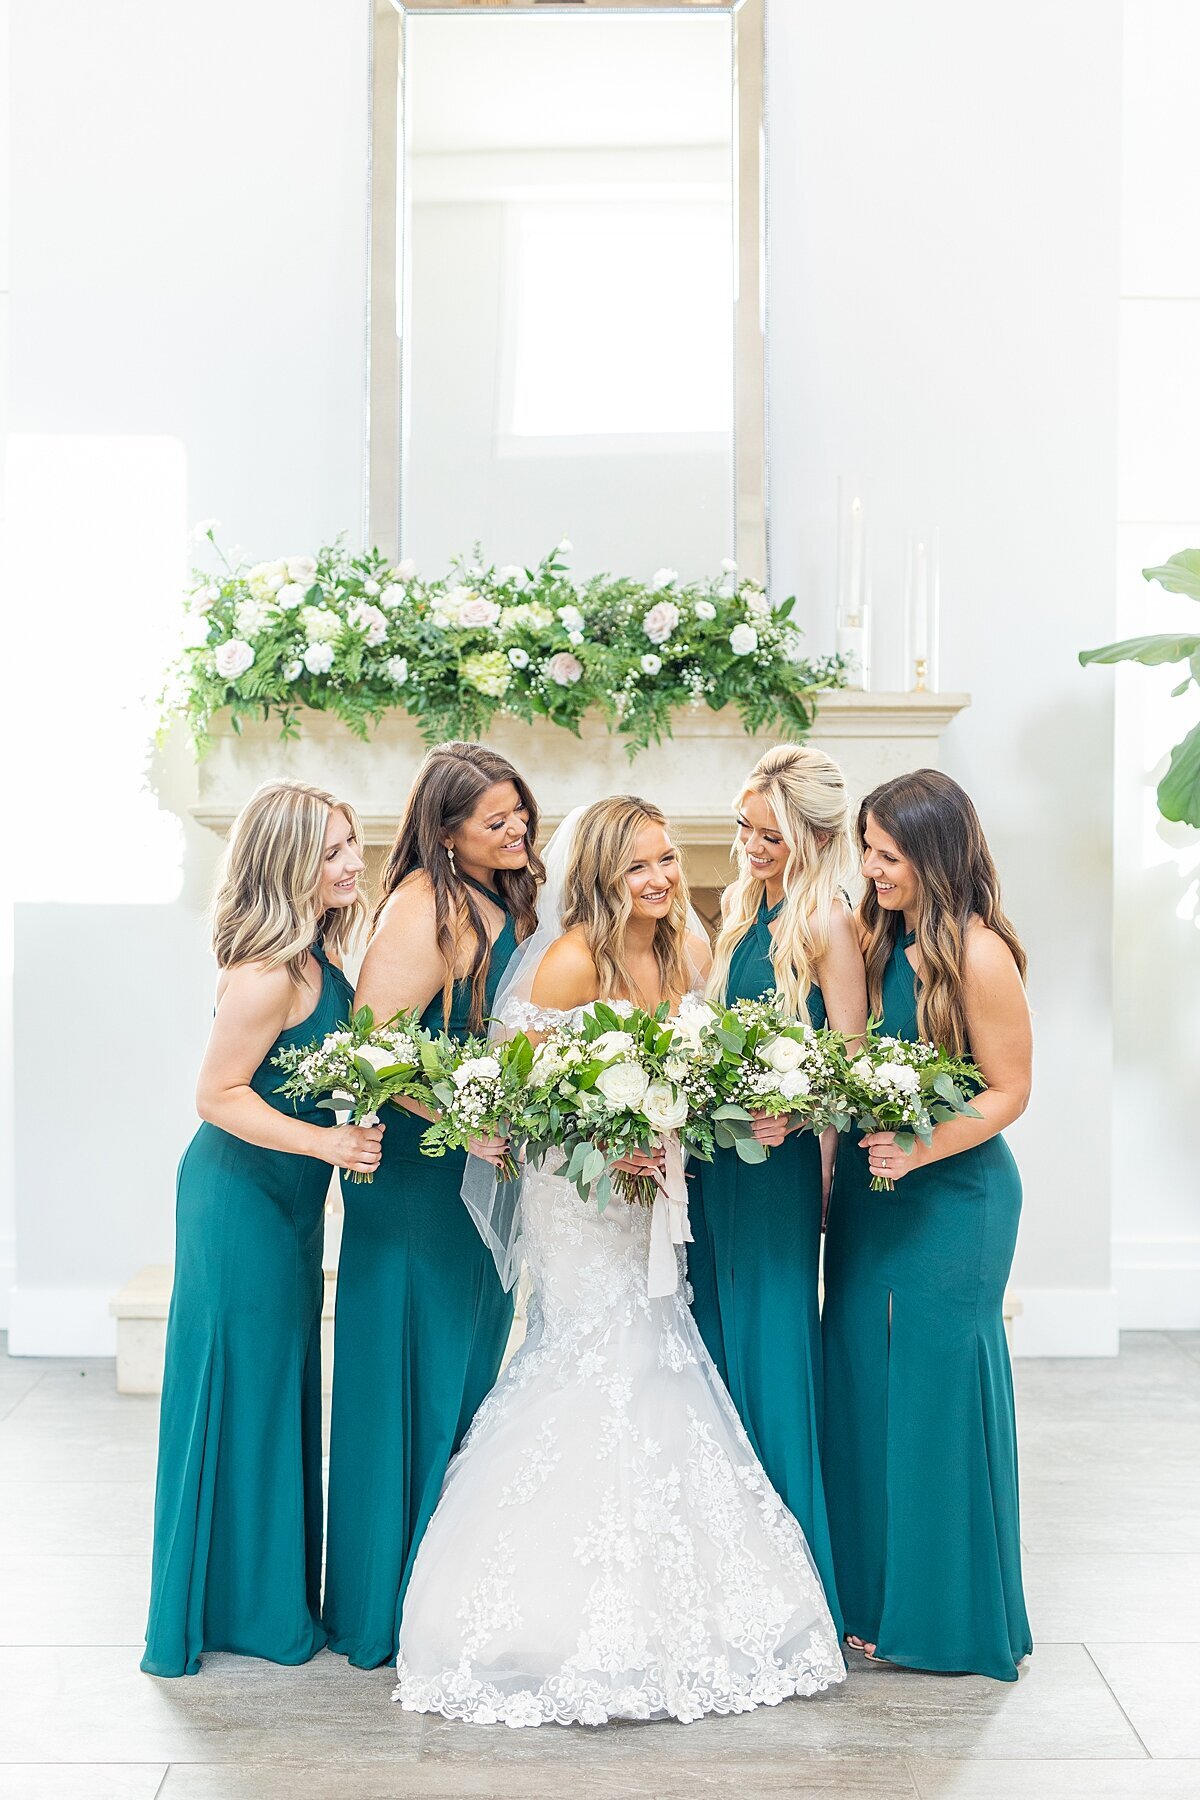 Bride and bridesmaids wearing Azazie dresses in Emerald by Sherr Weddings based in Vista, California.